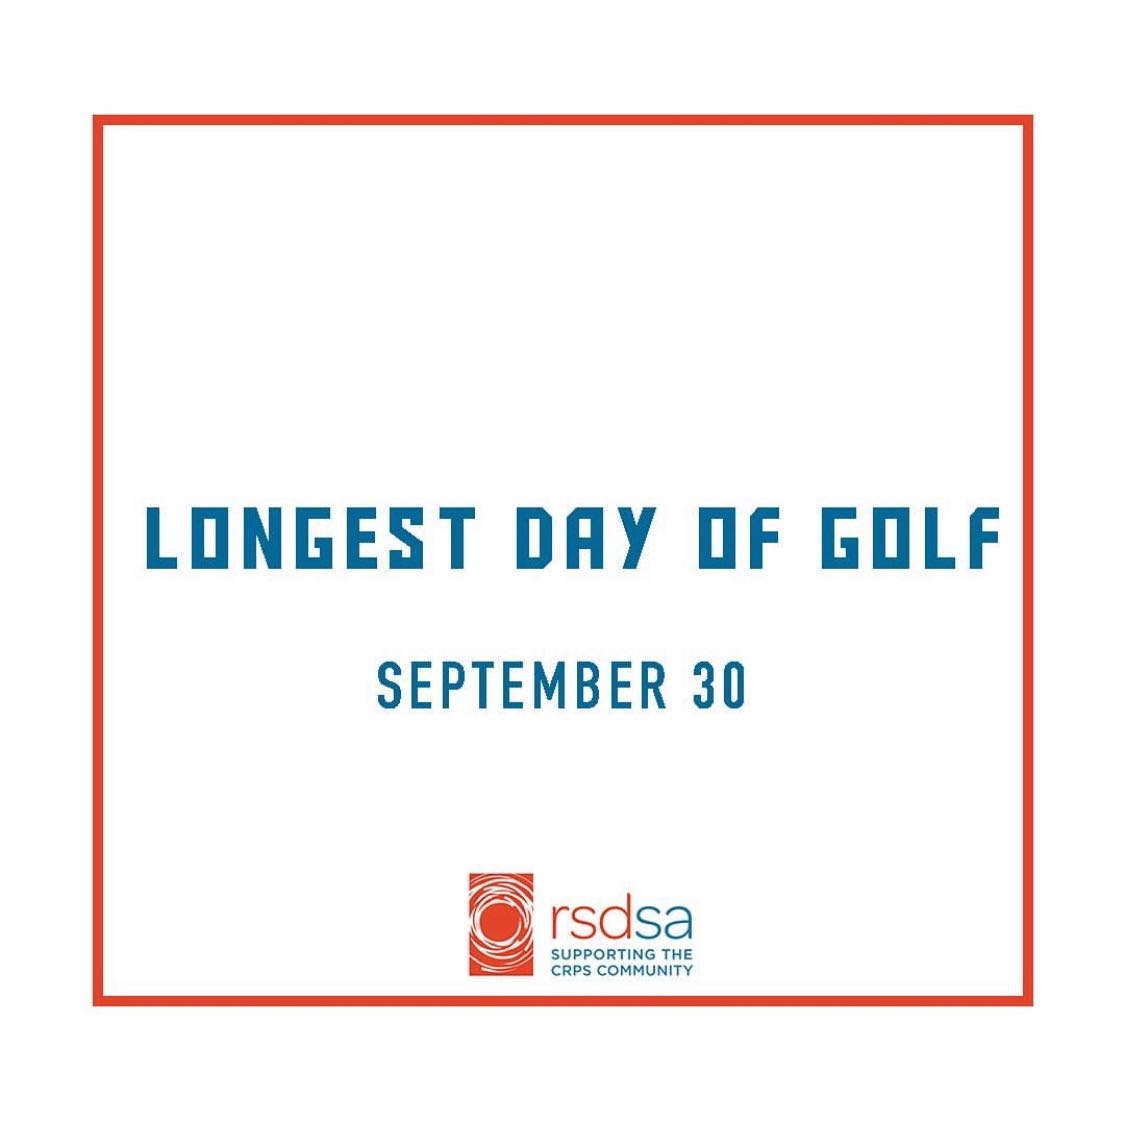 Join RSDSA for our Longest Day of Golf Fundraiser